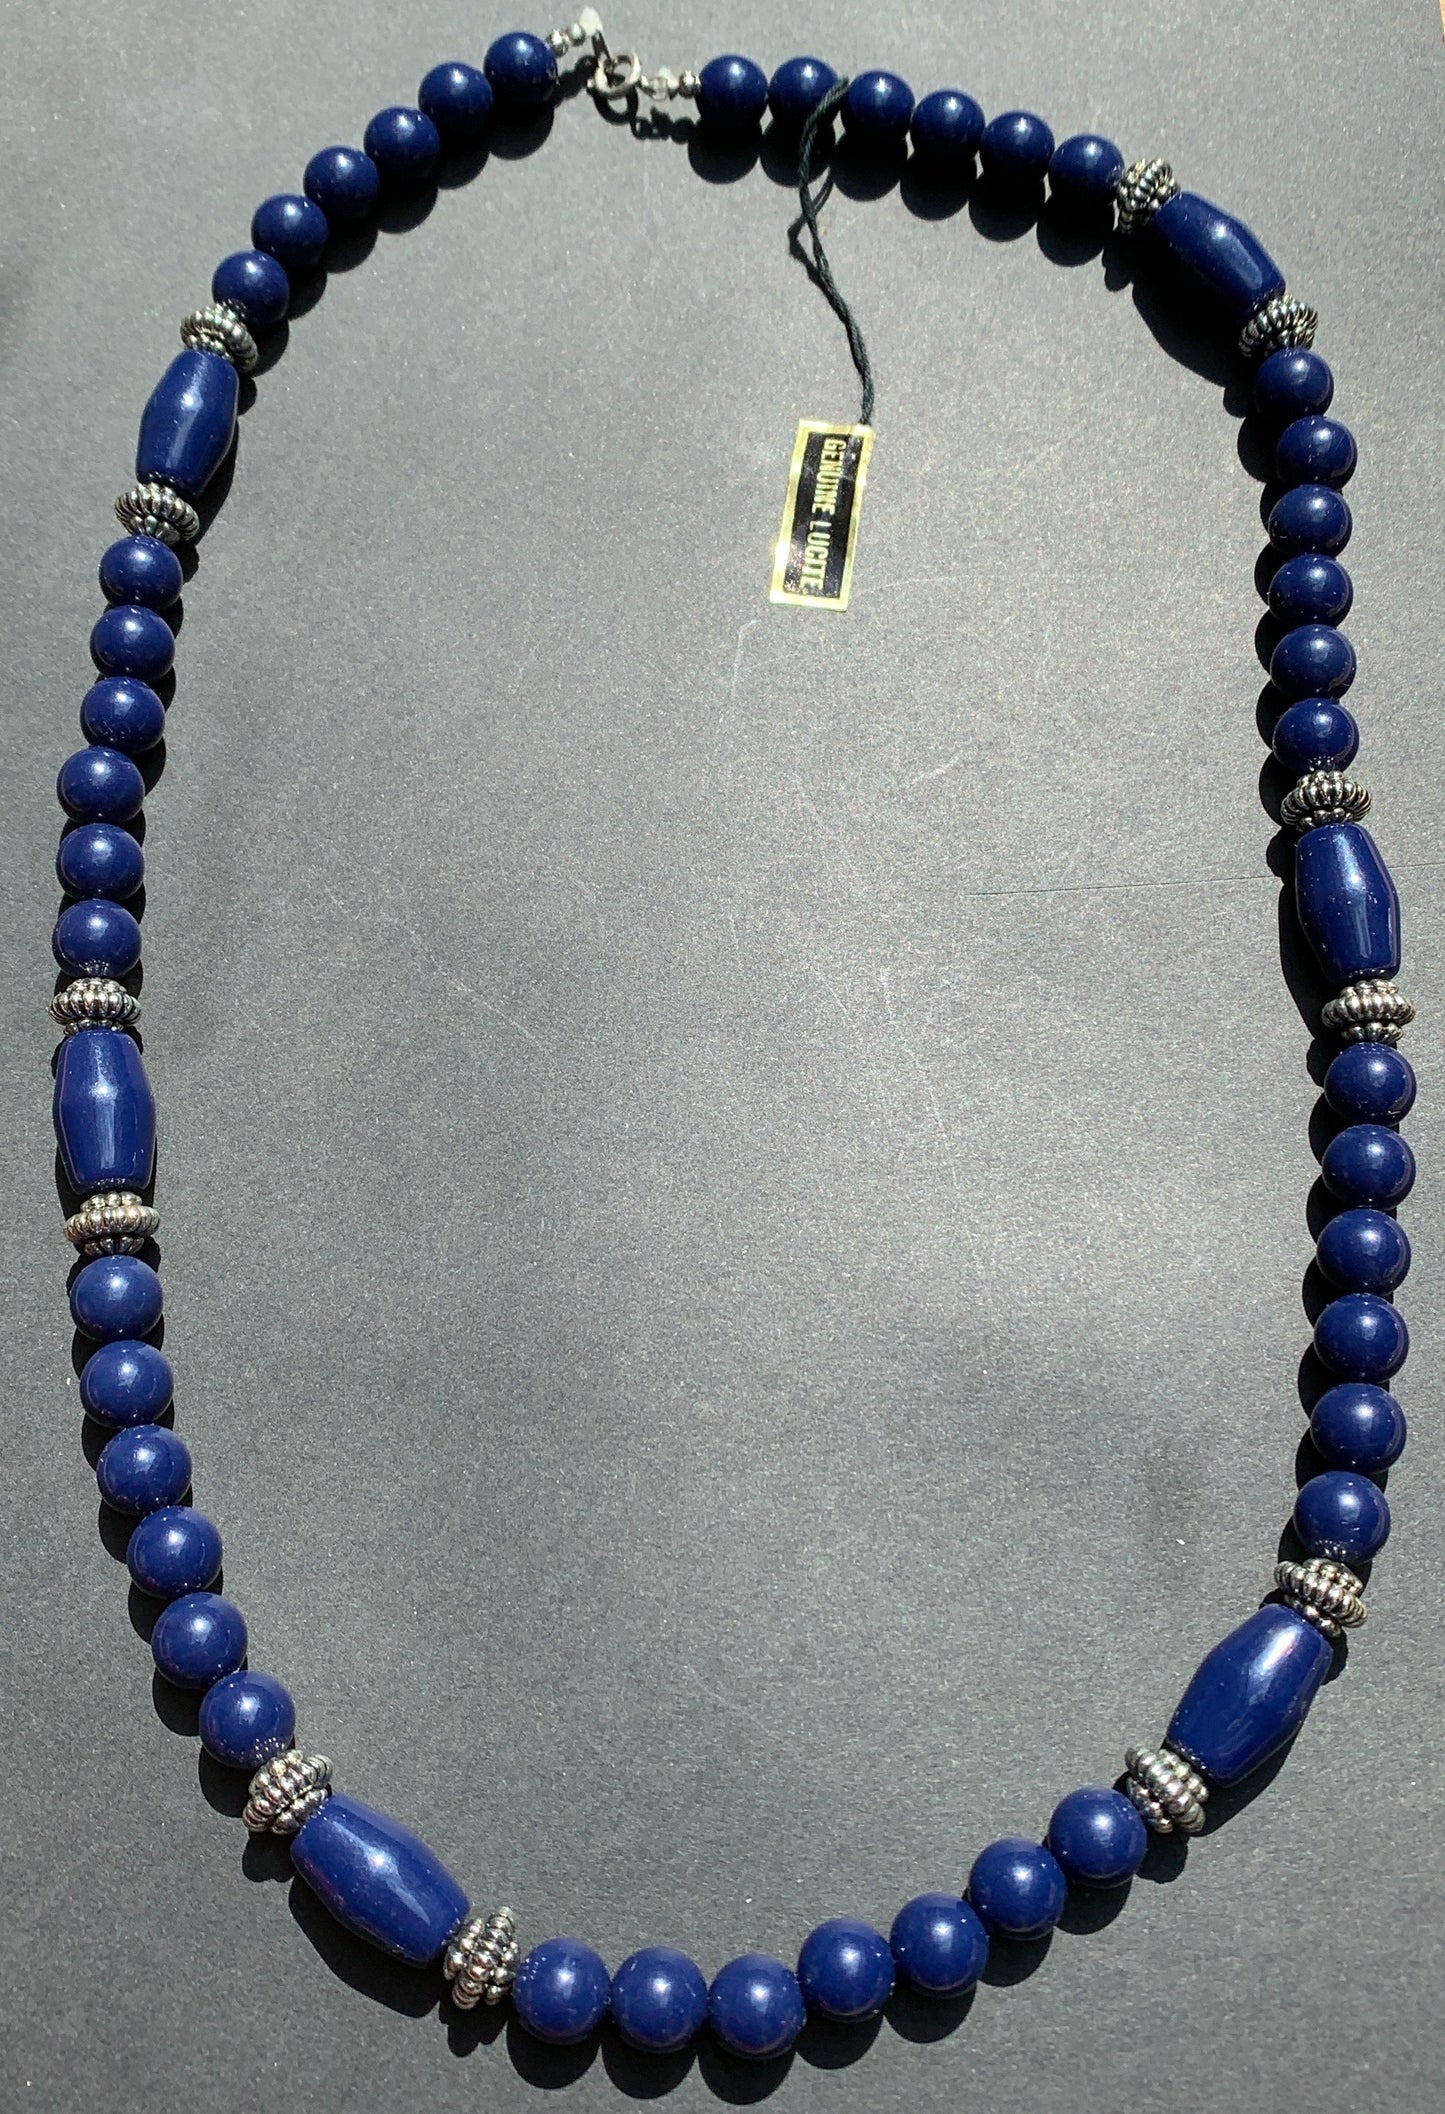 Vintage Royal Blue and Silver Lucite Beads